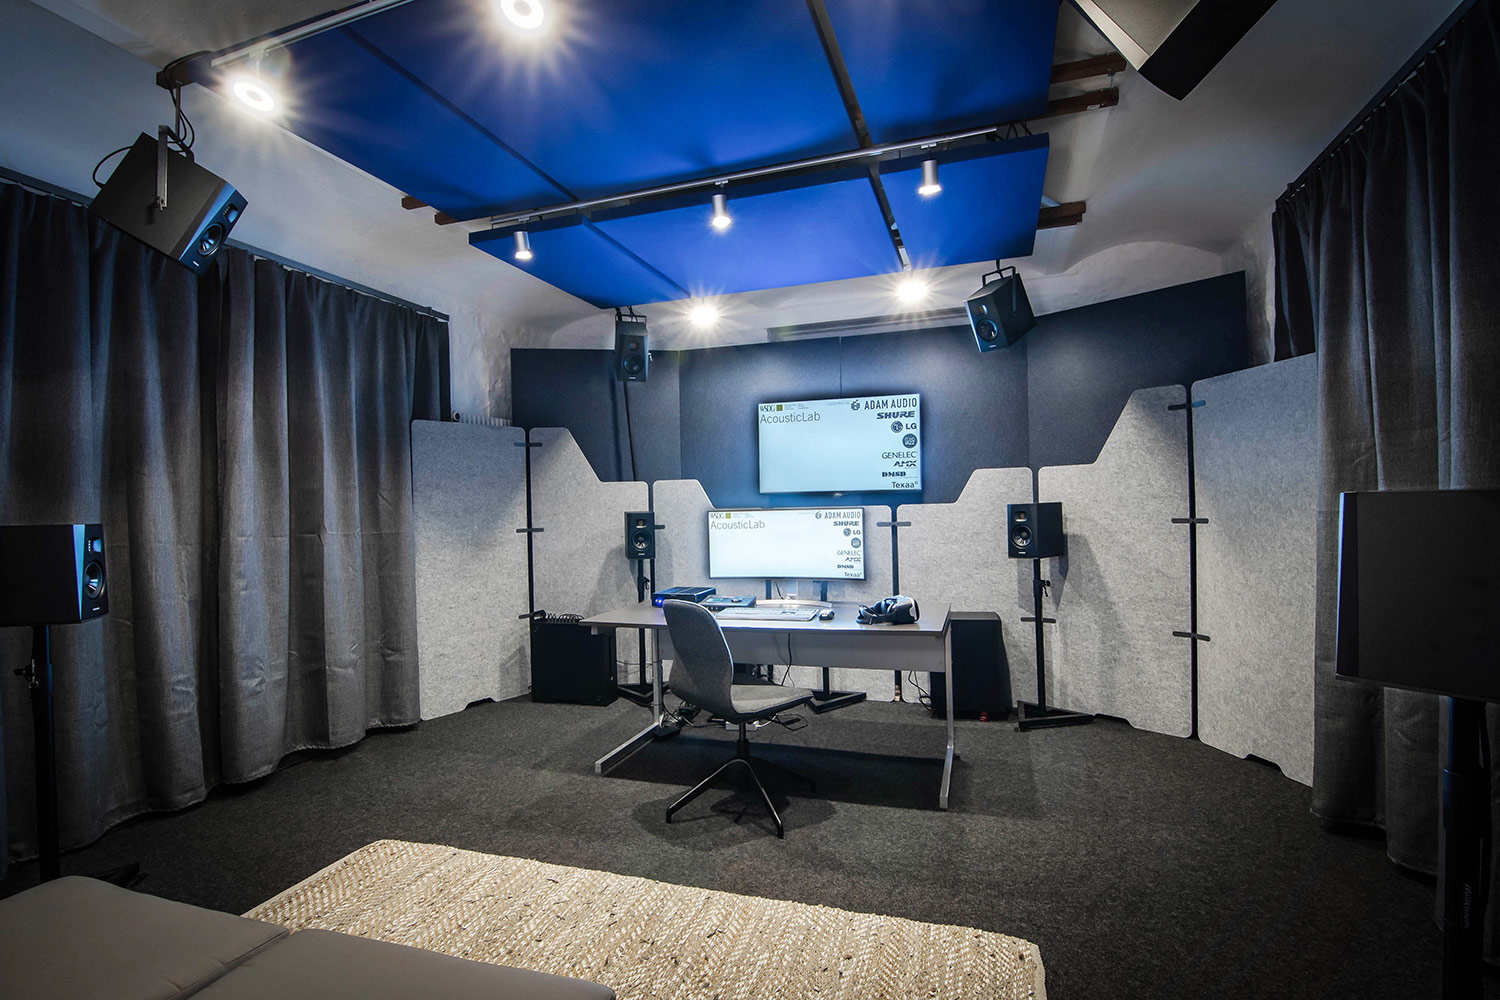 WSDG AcousticLab in Basel, Switzerland. Space designed to accurately demonstrate and reproduce different spaces auralization. Front View.